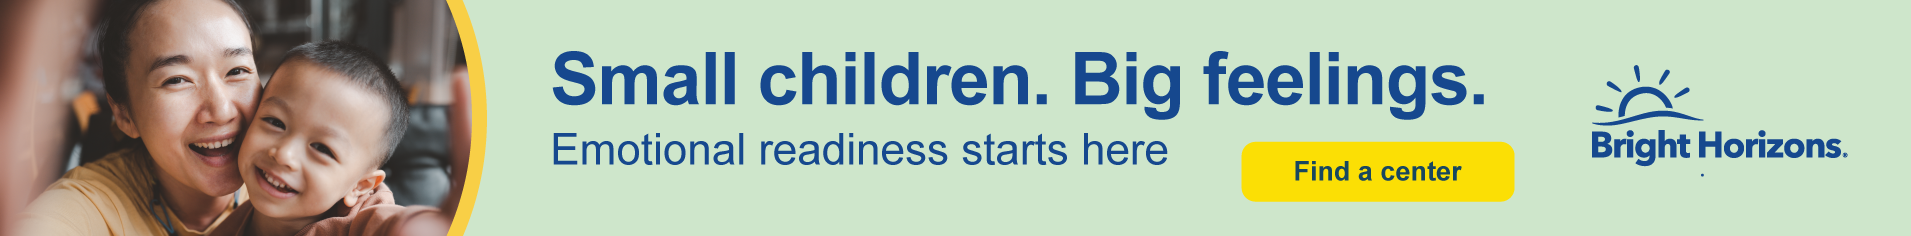 https://voiceamerica.com/shows/4199/be/Emotional Readiness - TPL Ad Banner 2.png